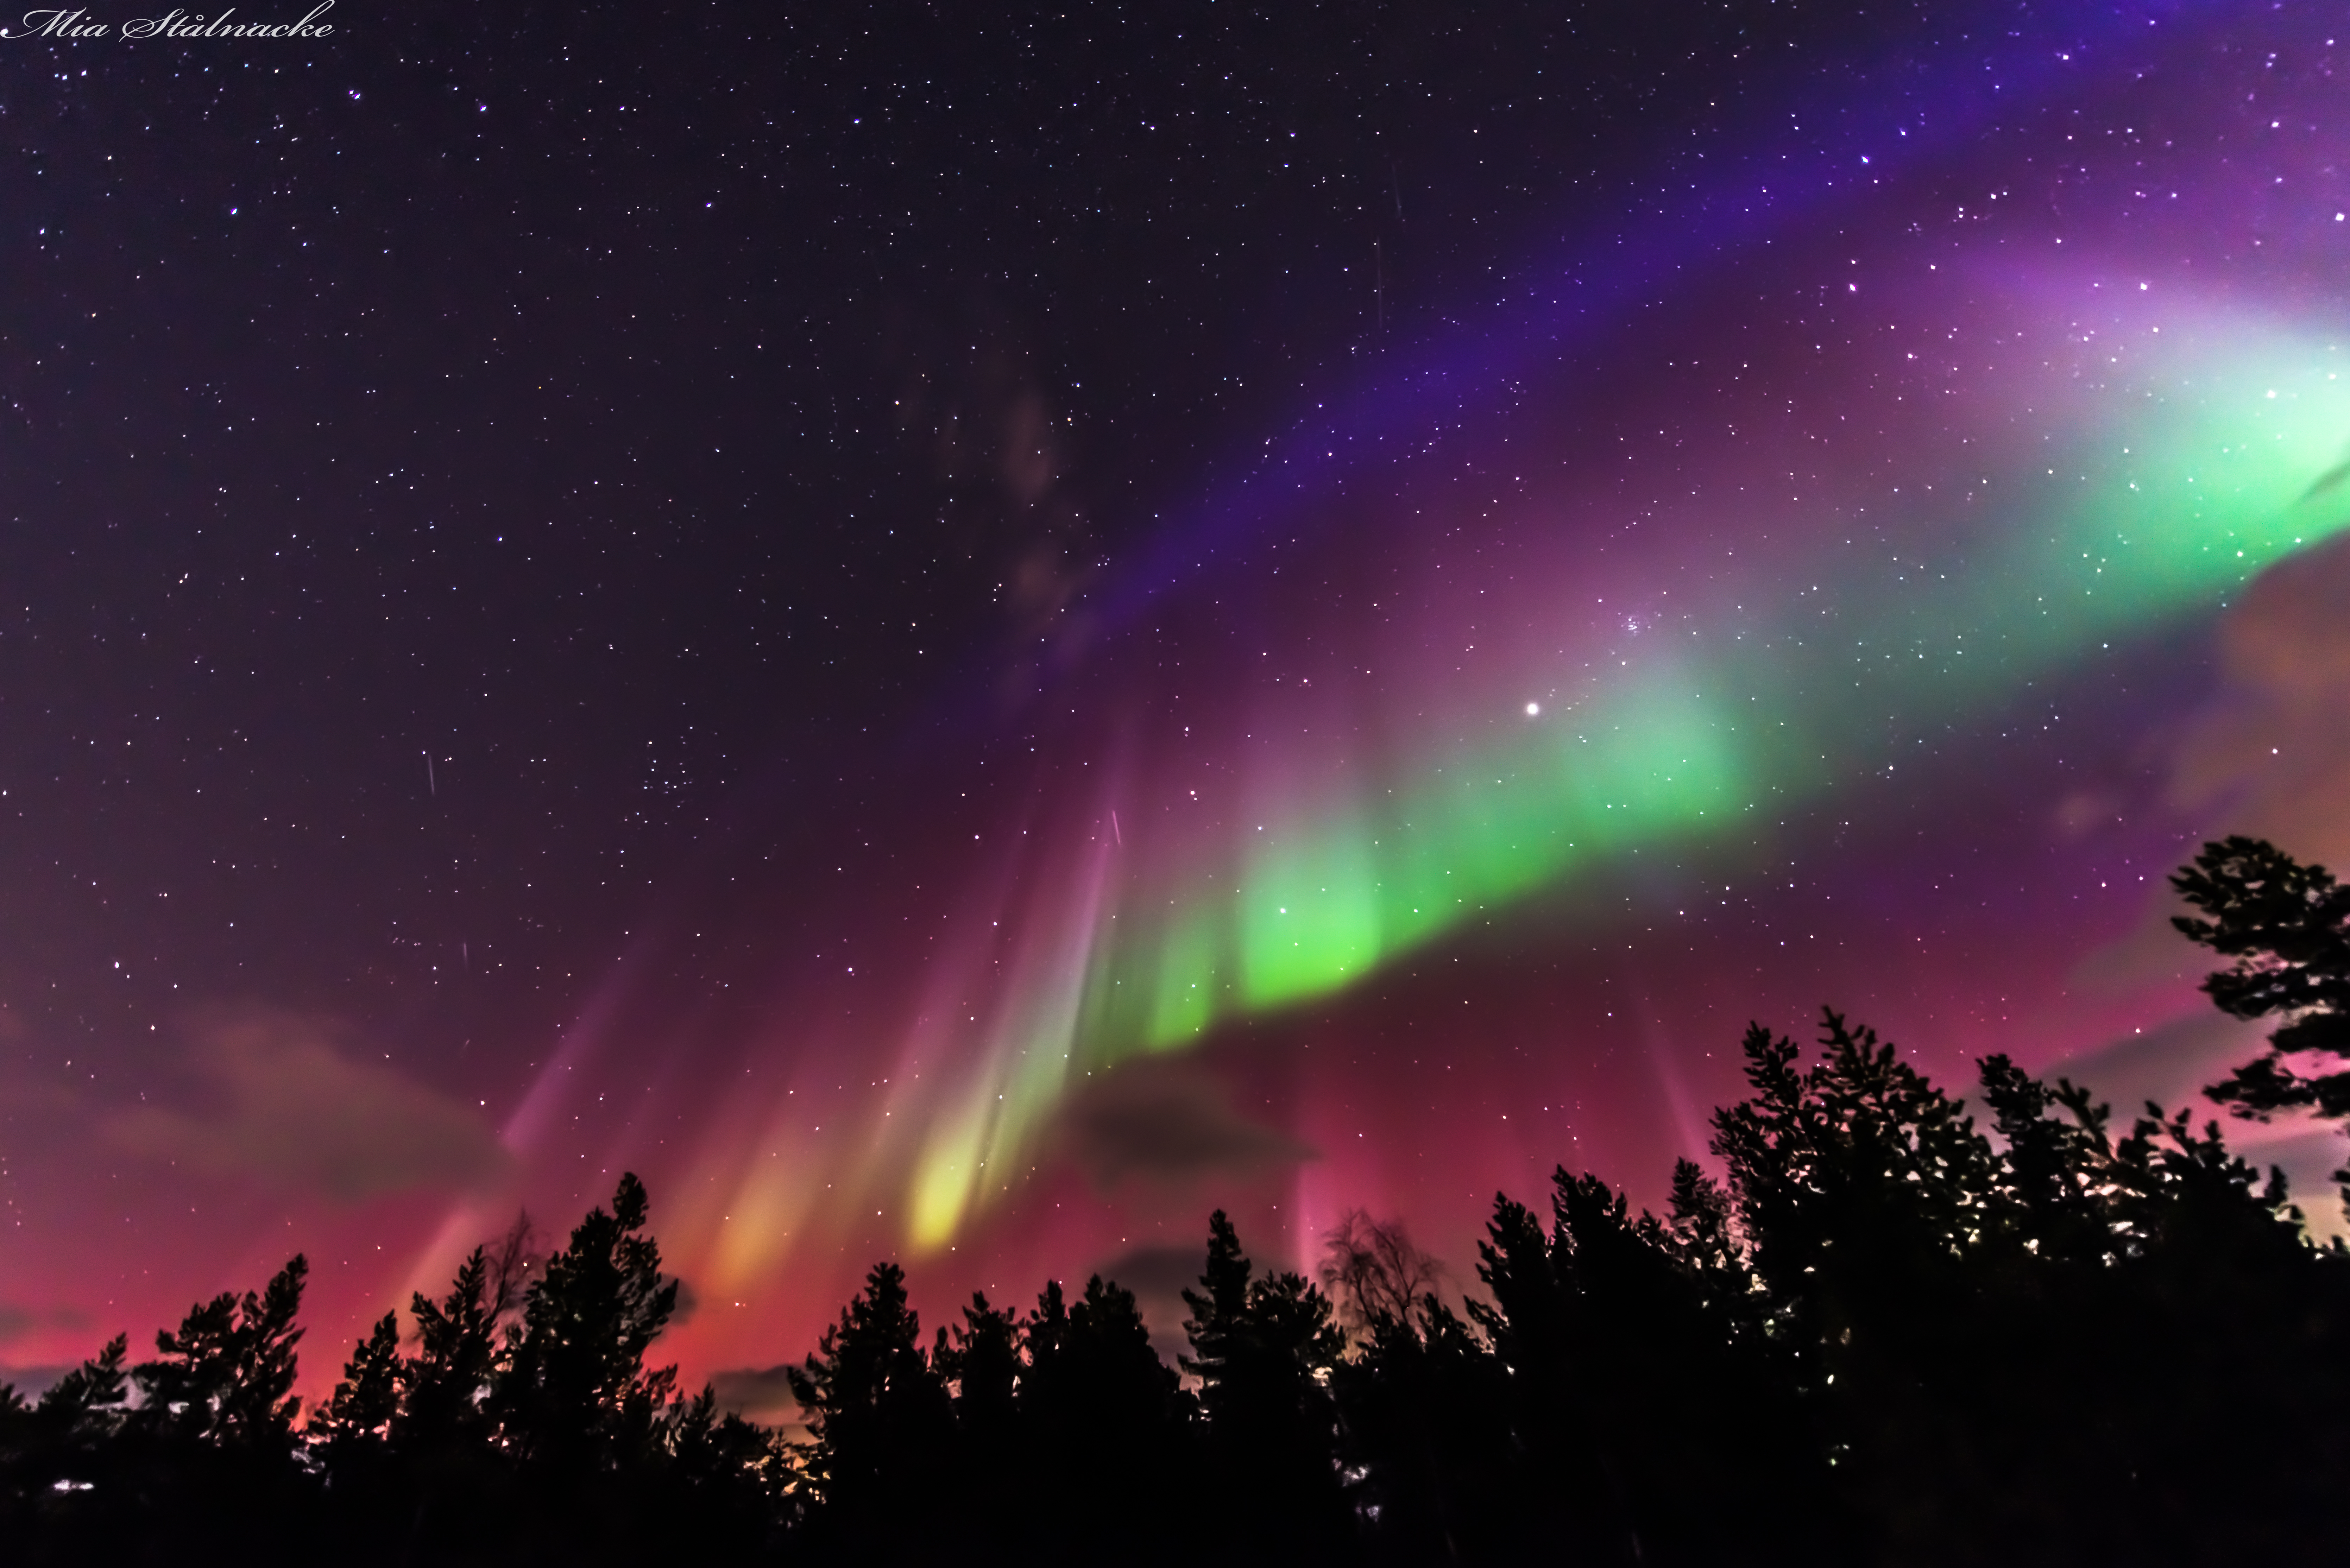 APOD: 2015 March 30 - A Flag Shaped Aurora over Sweden